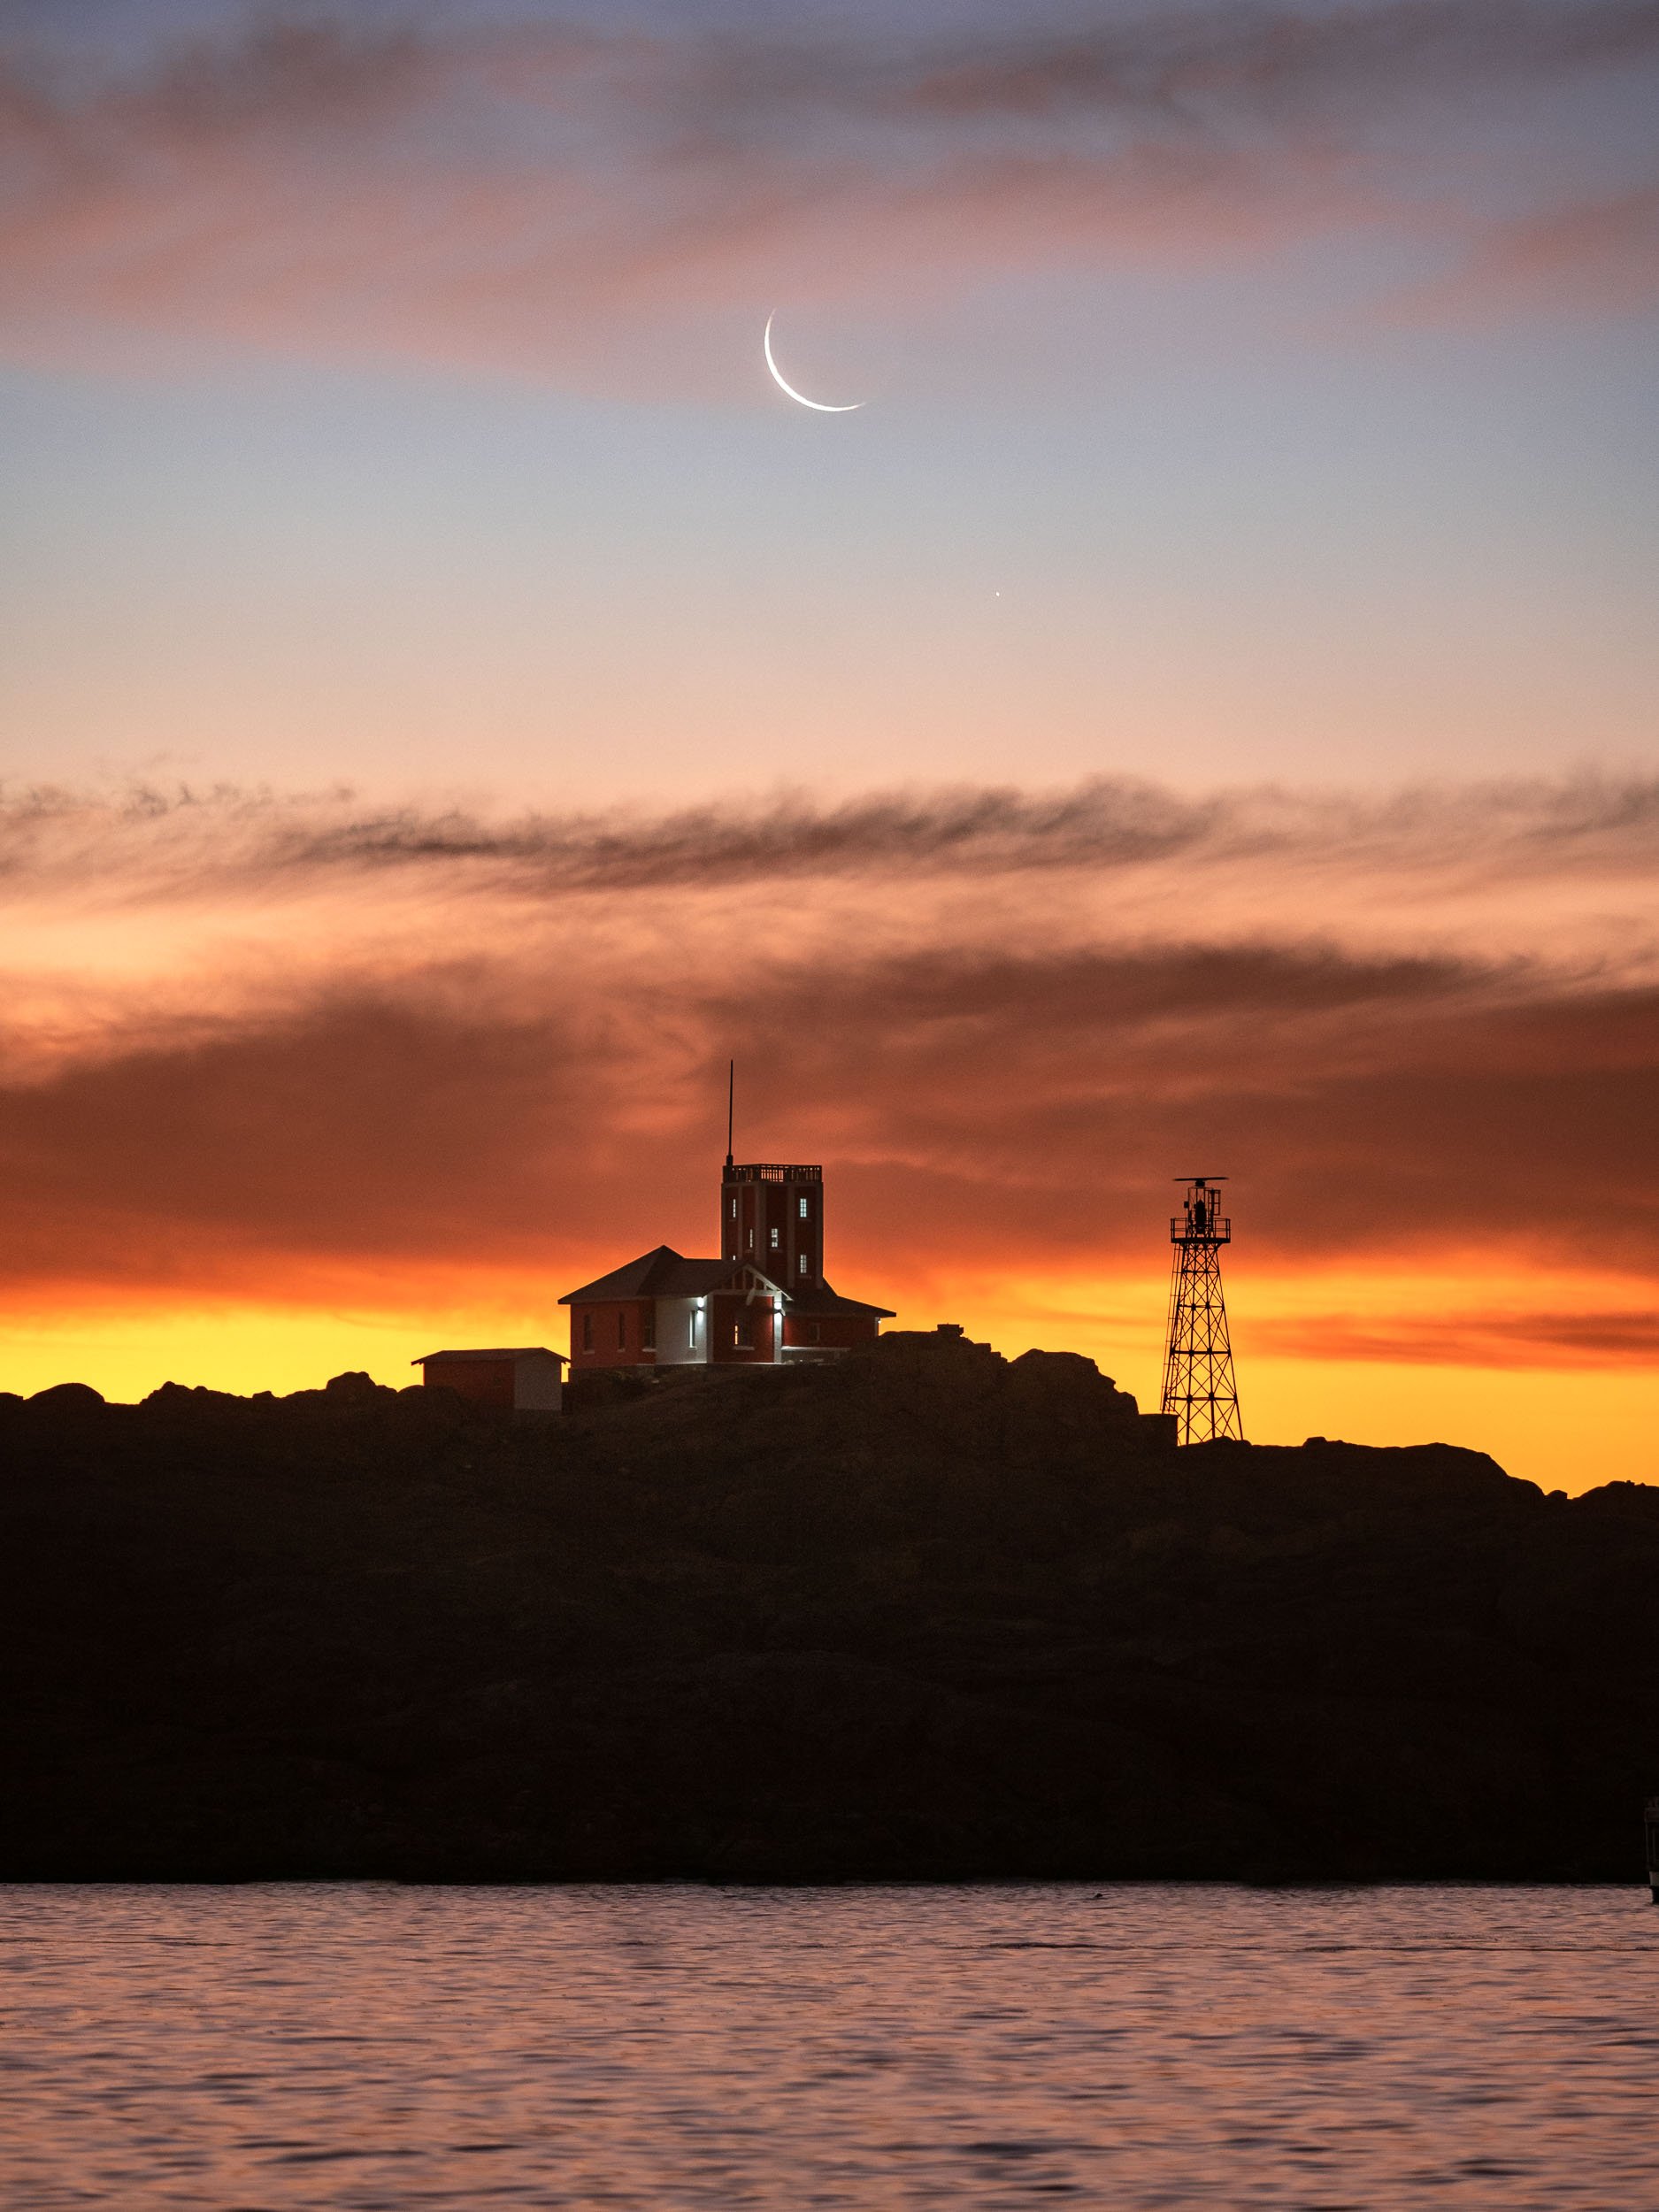 Moonset over the Lighthouse